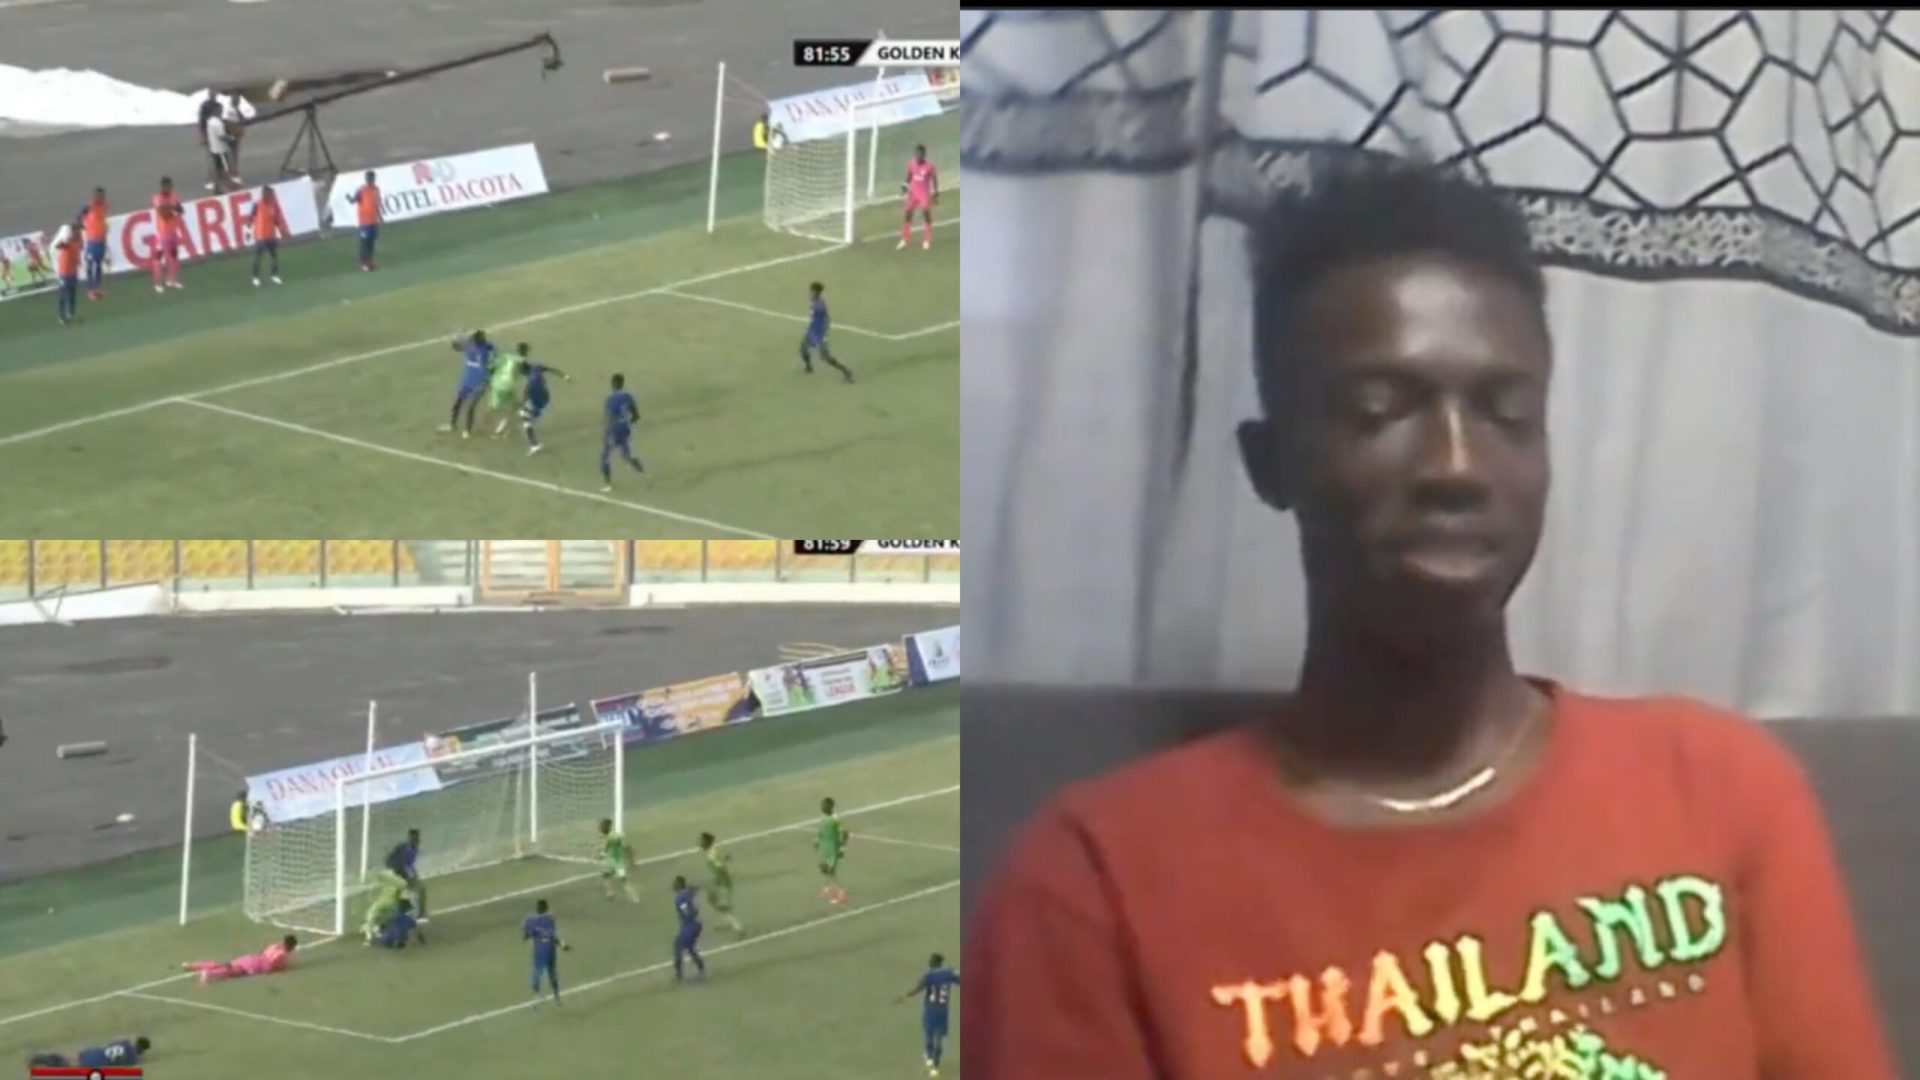 "He plays better than Messi, he needs support" – Ghanaians' reaction to excellent dribbling abilities of Division 2 player, Mizak Asante [Video]